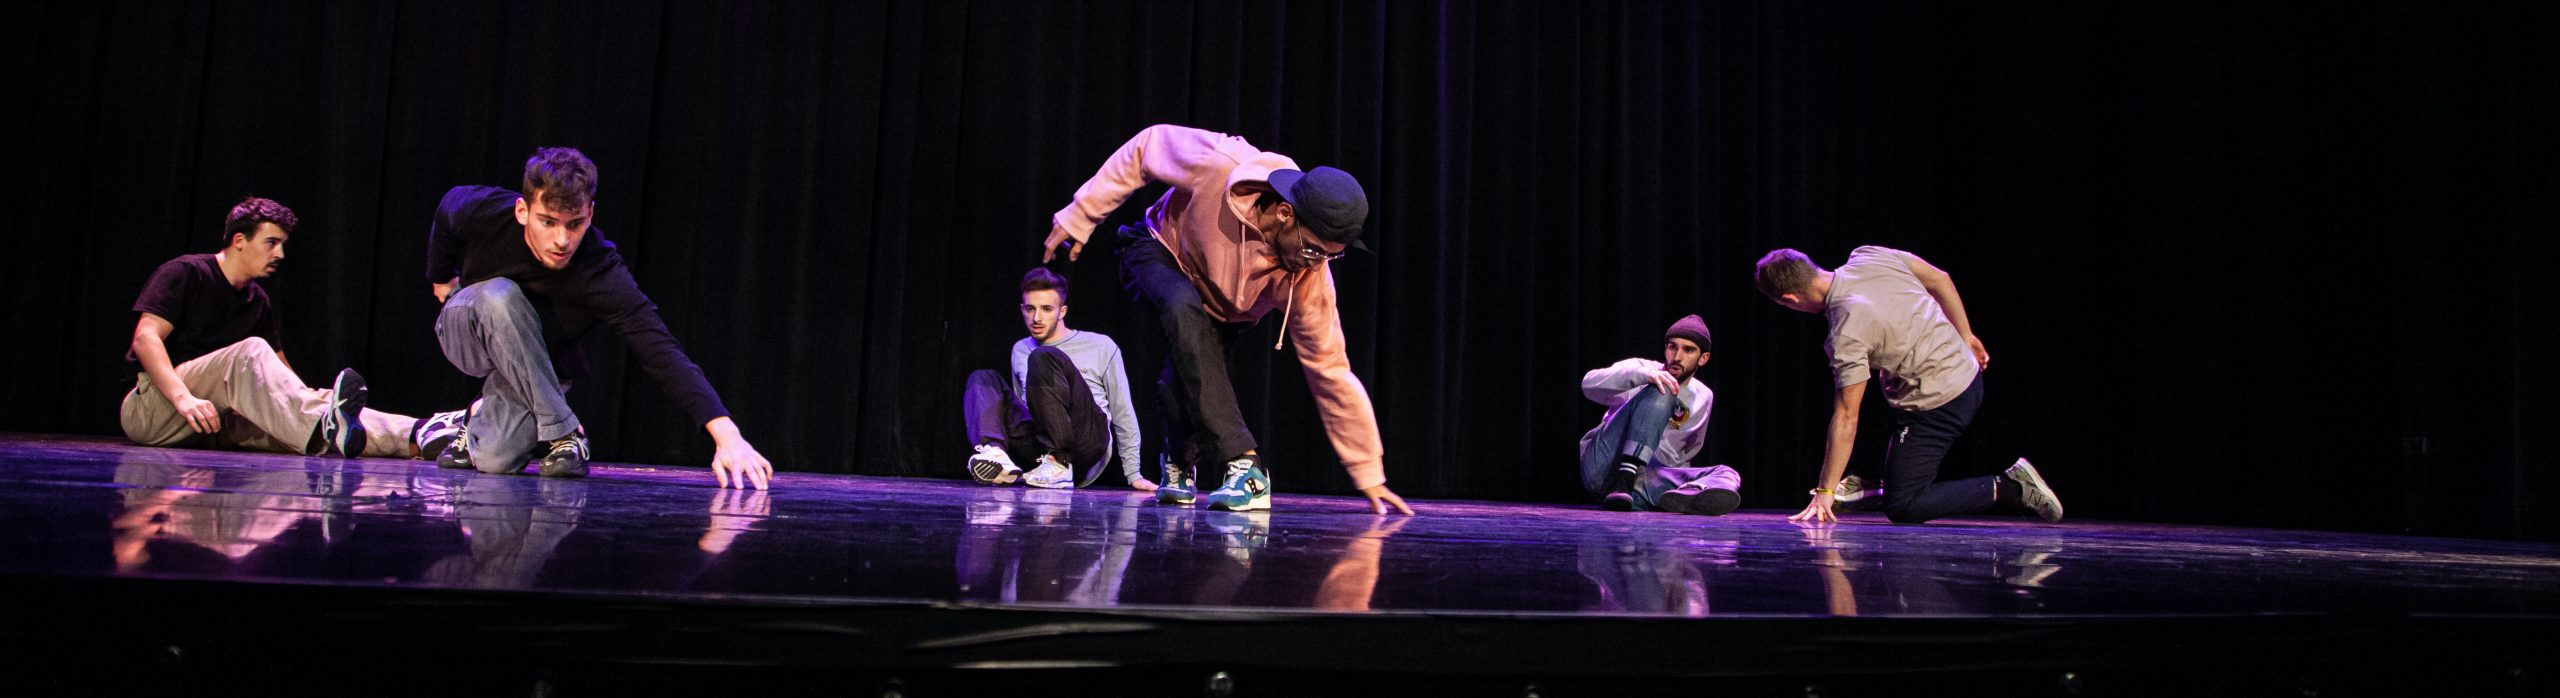 SNT CREW Breakdance Compagnie Spectacle